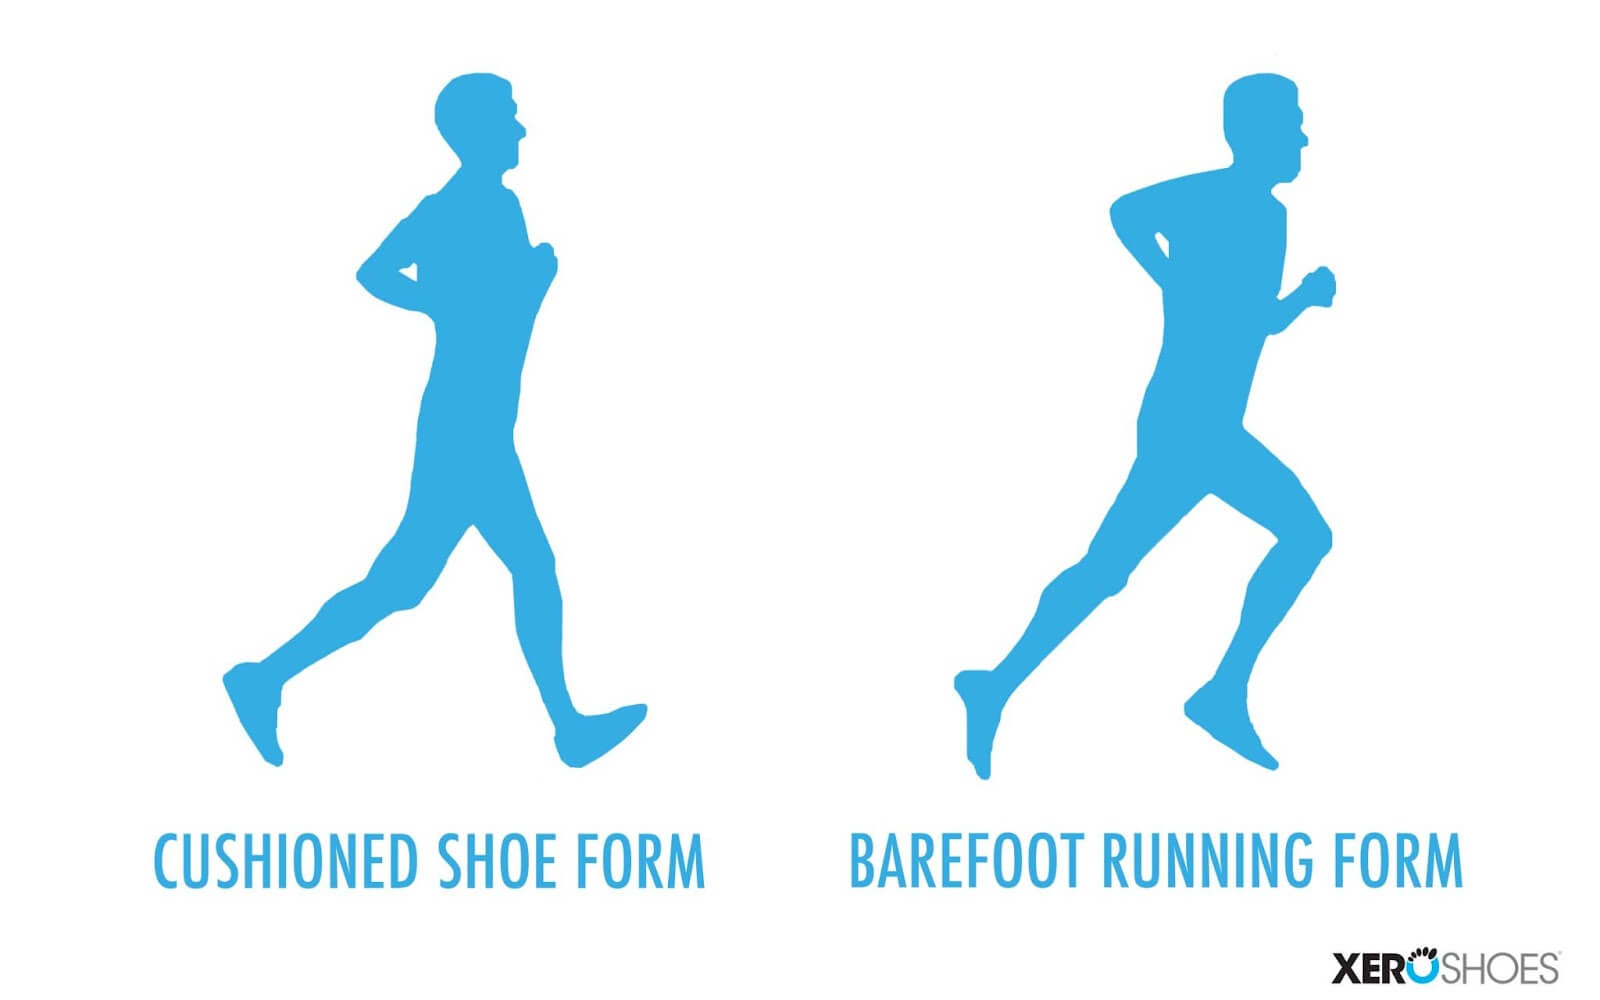 Cushioned Shoes or Going Barefoot: Which is Better for Running?